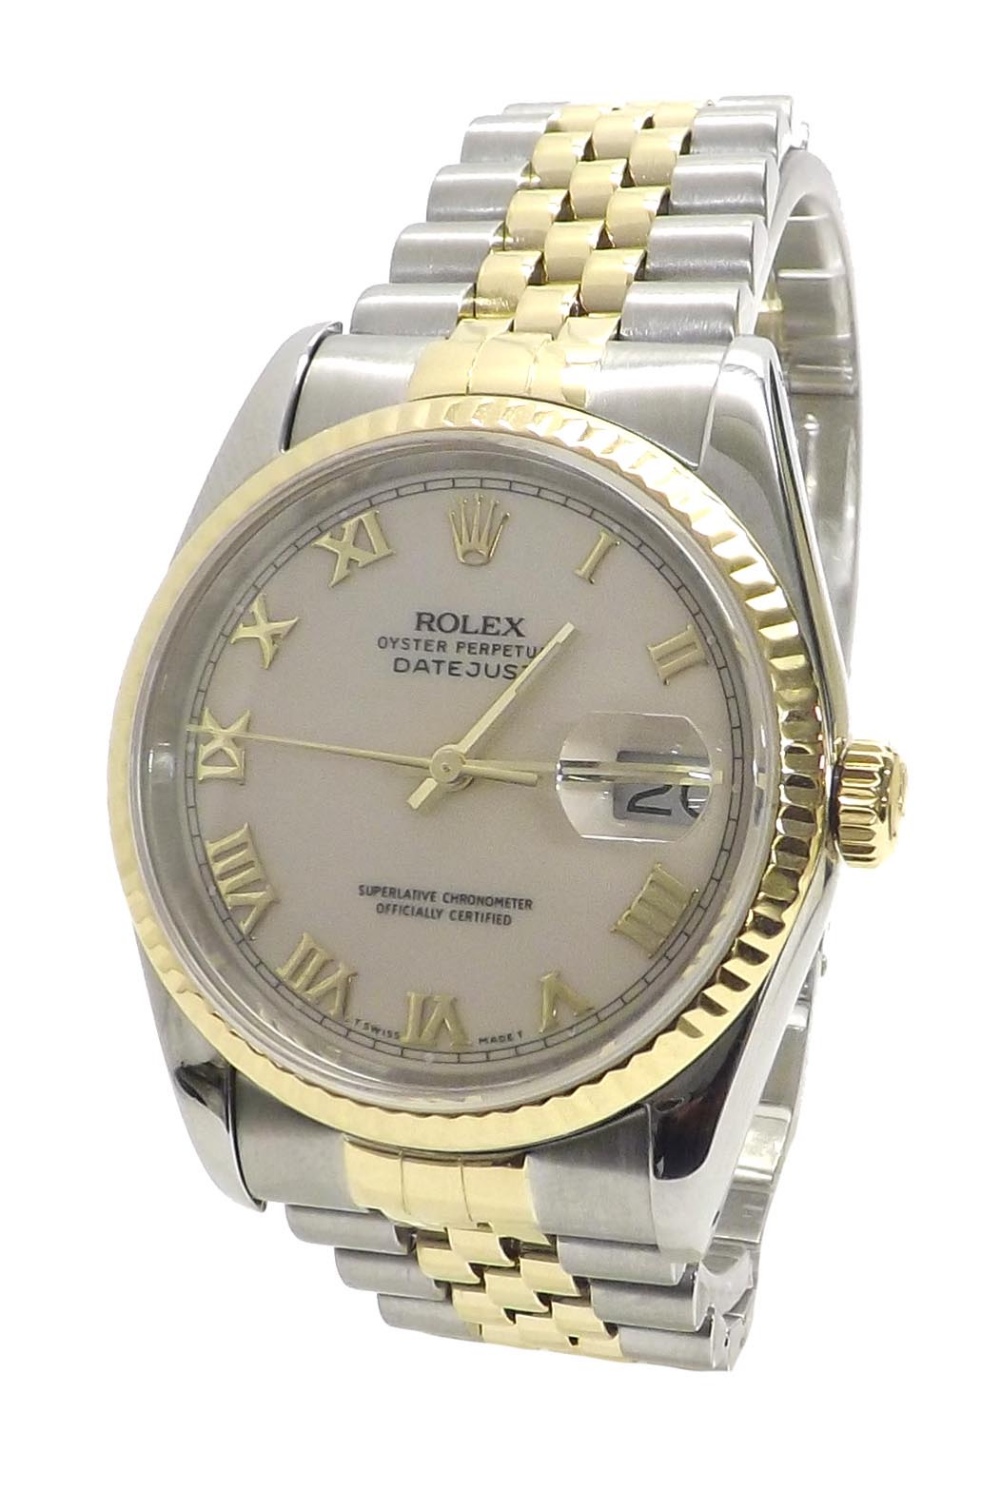 Rolex Oyster Perpetual Datejust stainless steel and gold gentleman's bracelet watch, ref. 16233, no. - Image 2 of 3